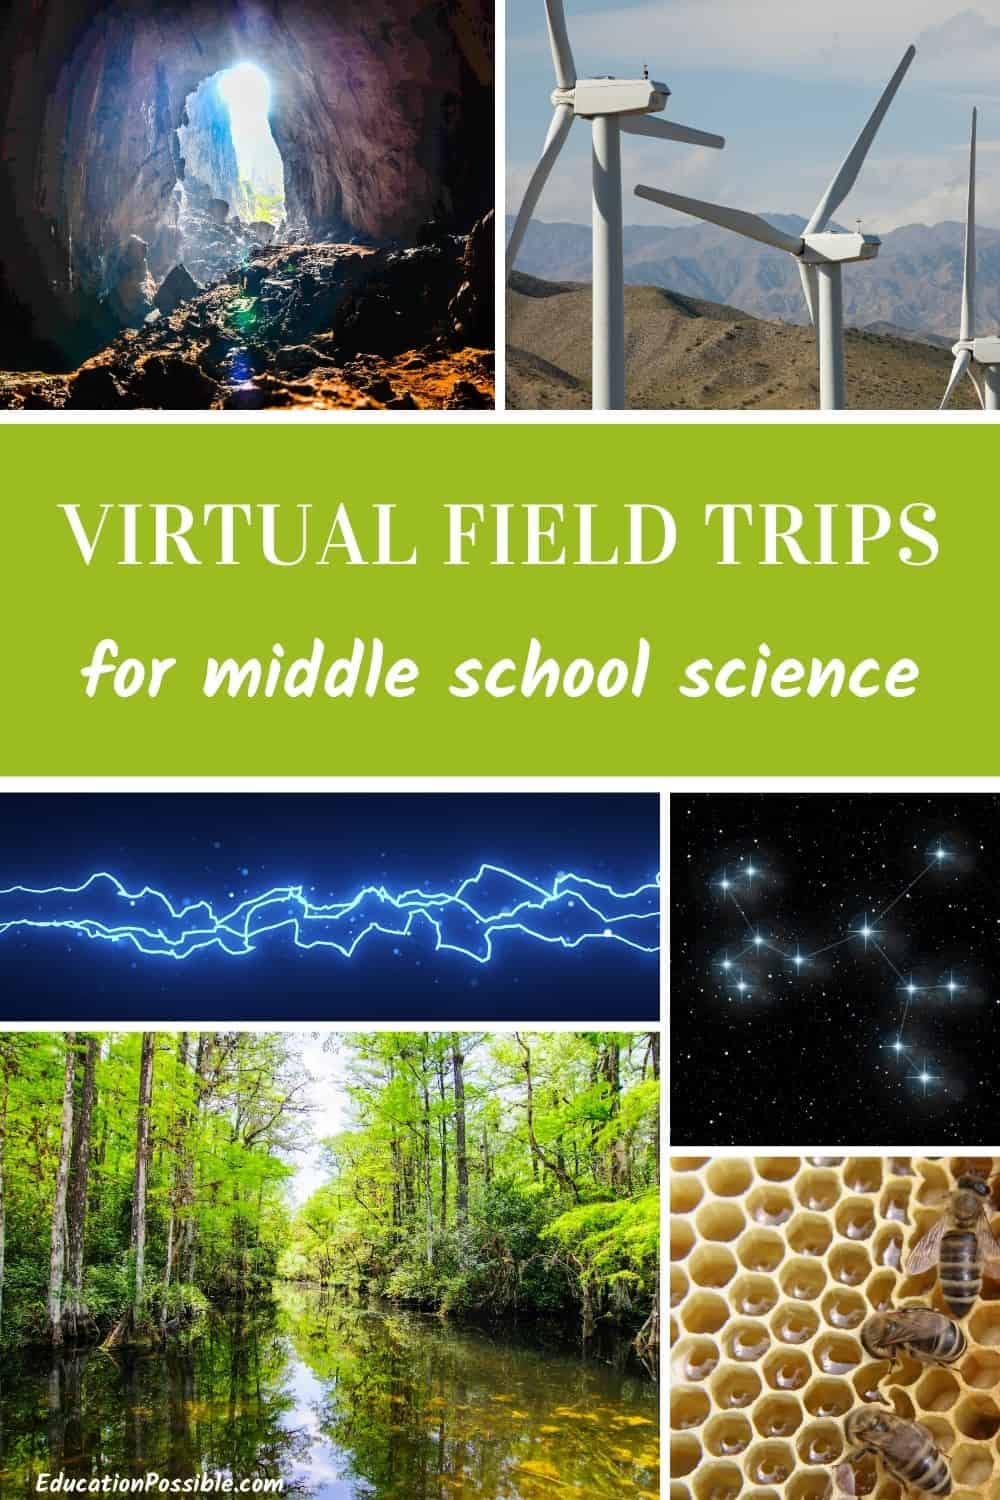 Collage of 6 images for science virtual tours topics. Top is cave and wind turbine. Bottom is electric current, constellation, everglades, beehive.